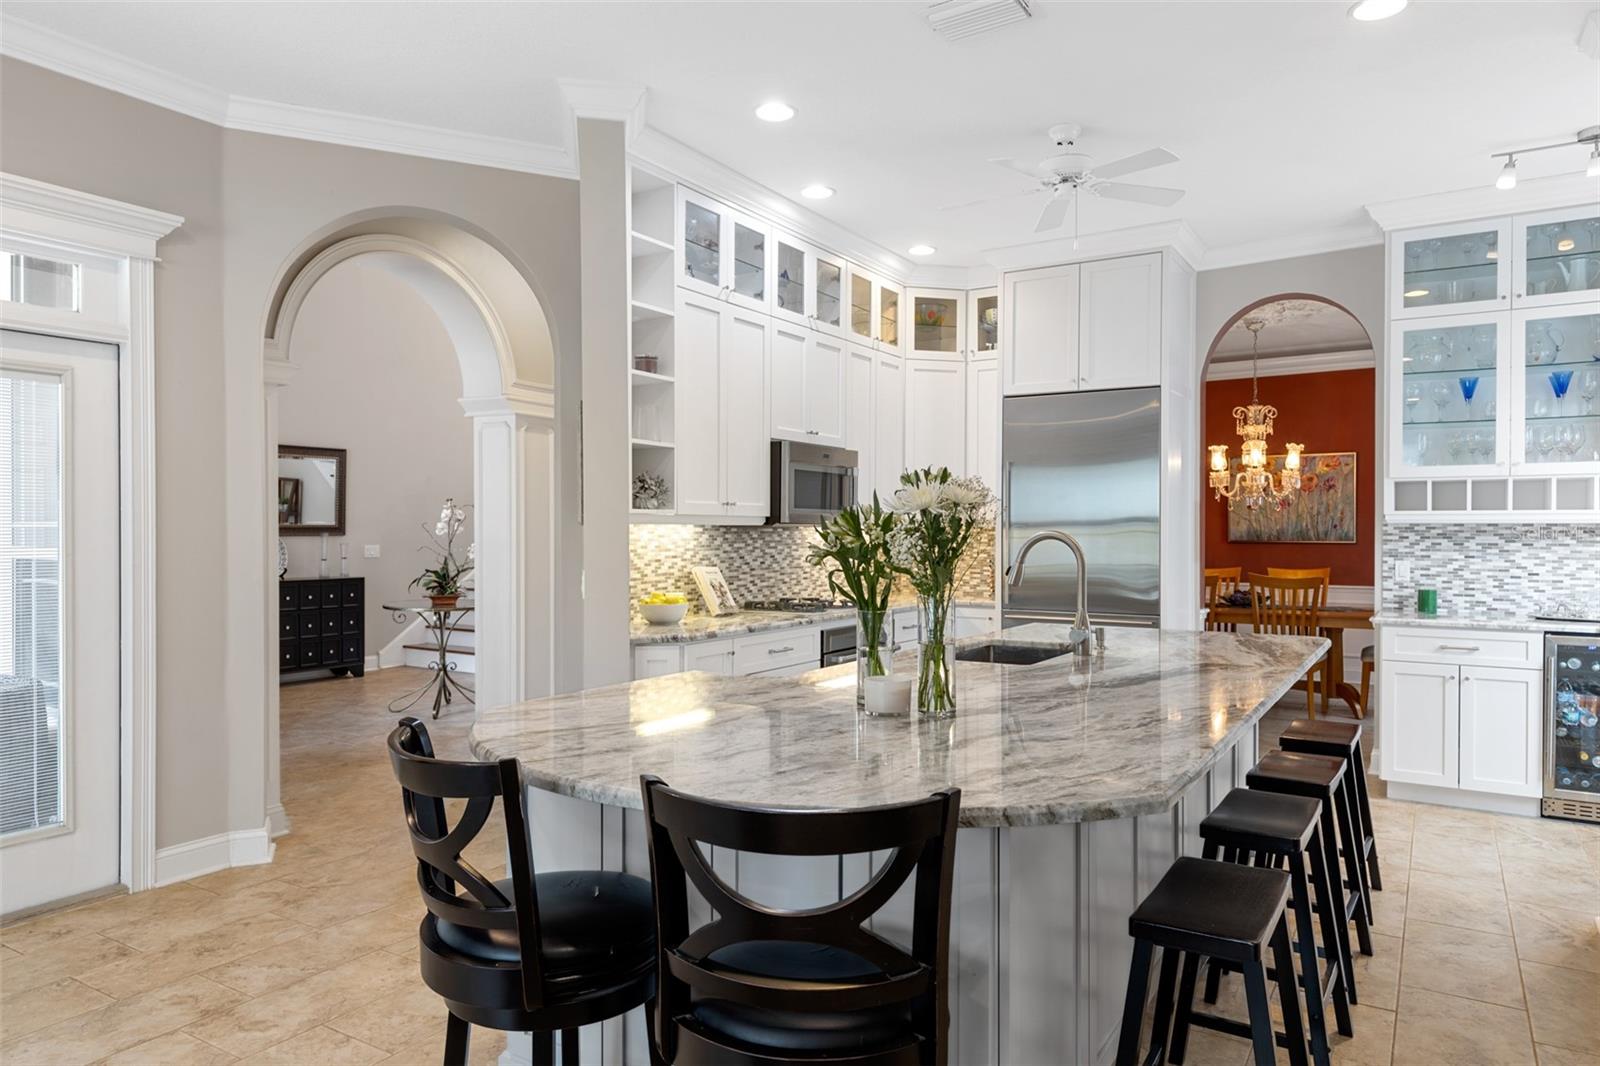 Custom Granite island with breakfast bar, offering the perfect space to gather with friends and family.